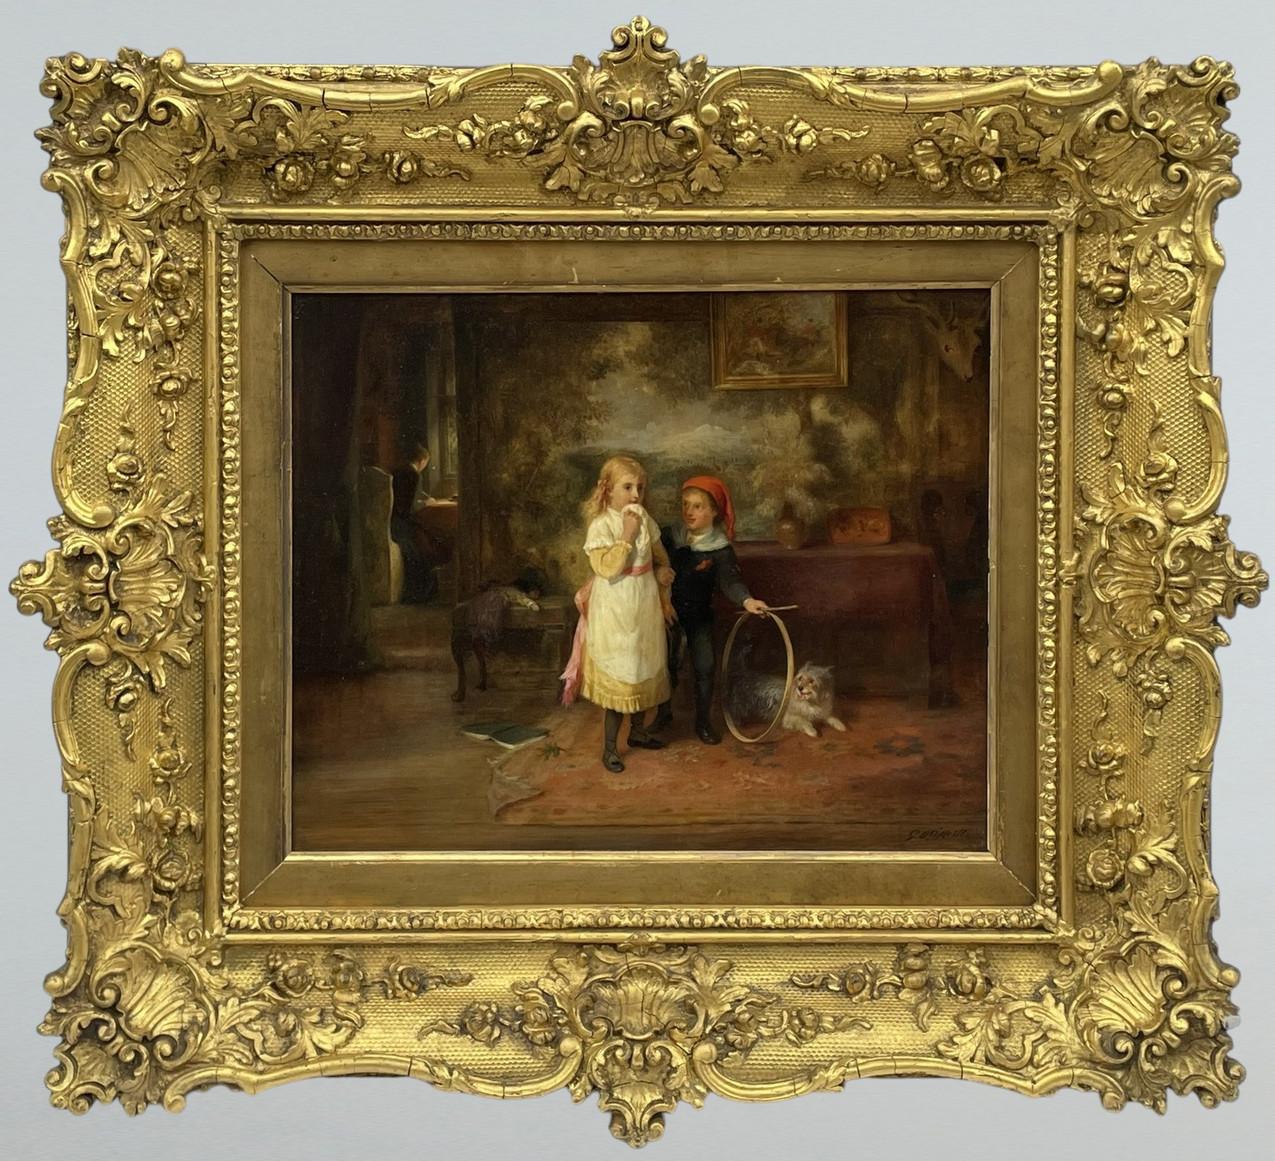 An exceptionally fine quality example of a framed Mid Victorian Oil Painting on Artists board of compact size and of Museum quality, by renowned Irish Painter George Bernard O’Neill. Complete with its original good quality heavy (original) richly